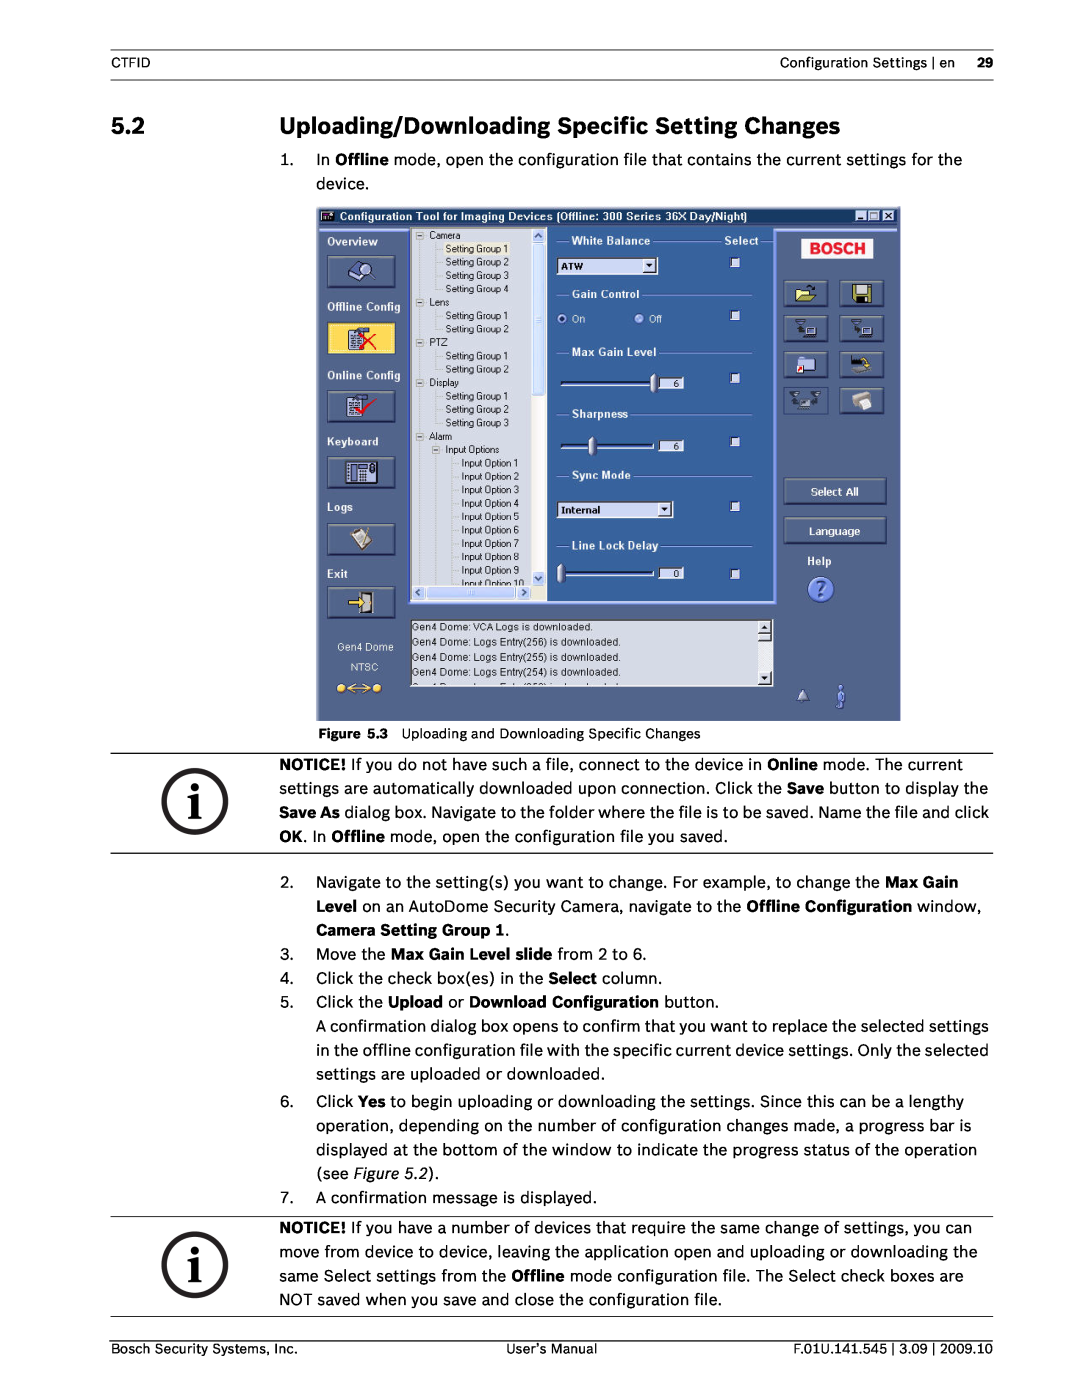 Bosch Appliances VP-CFGSFT user manual 5.2Uploading/Downloading Specific Setting Changes 